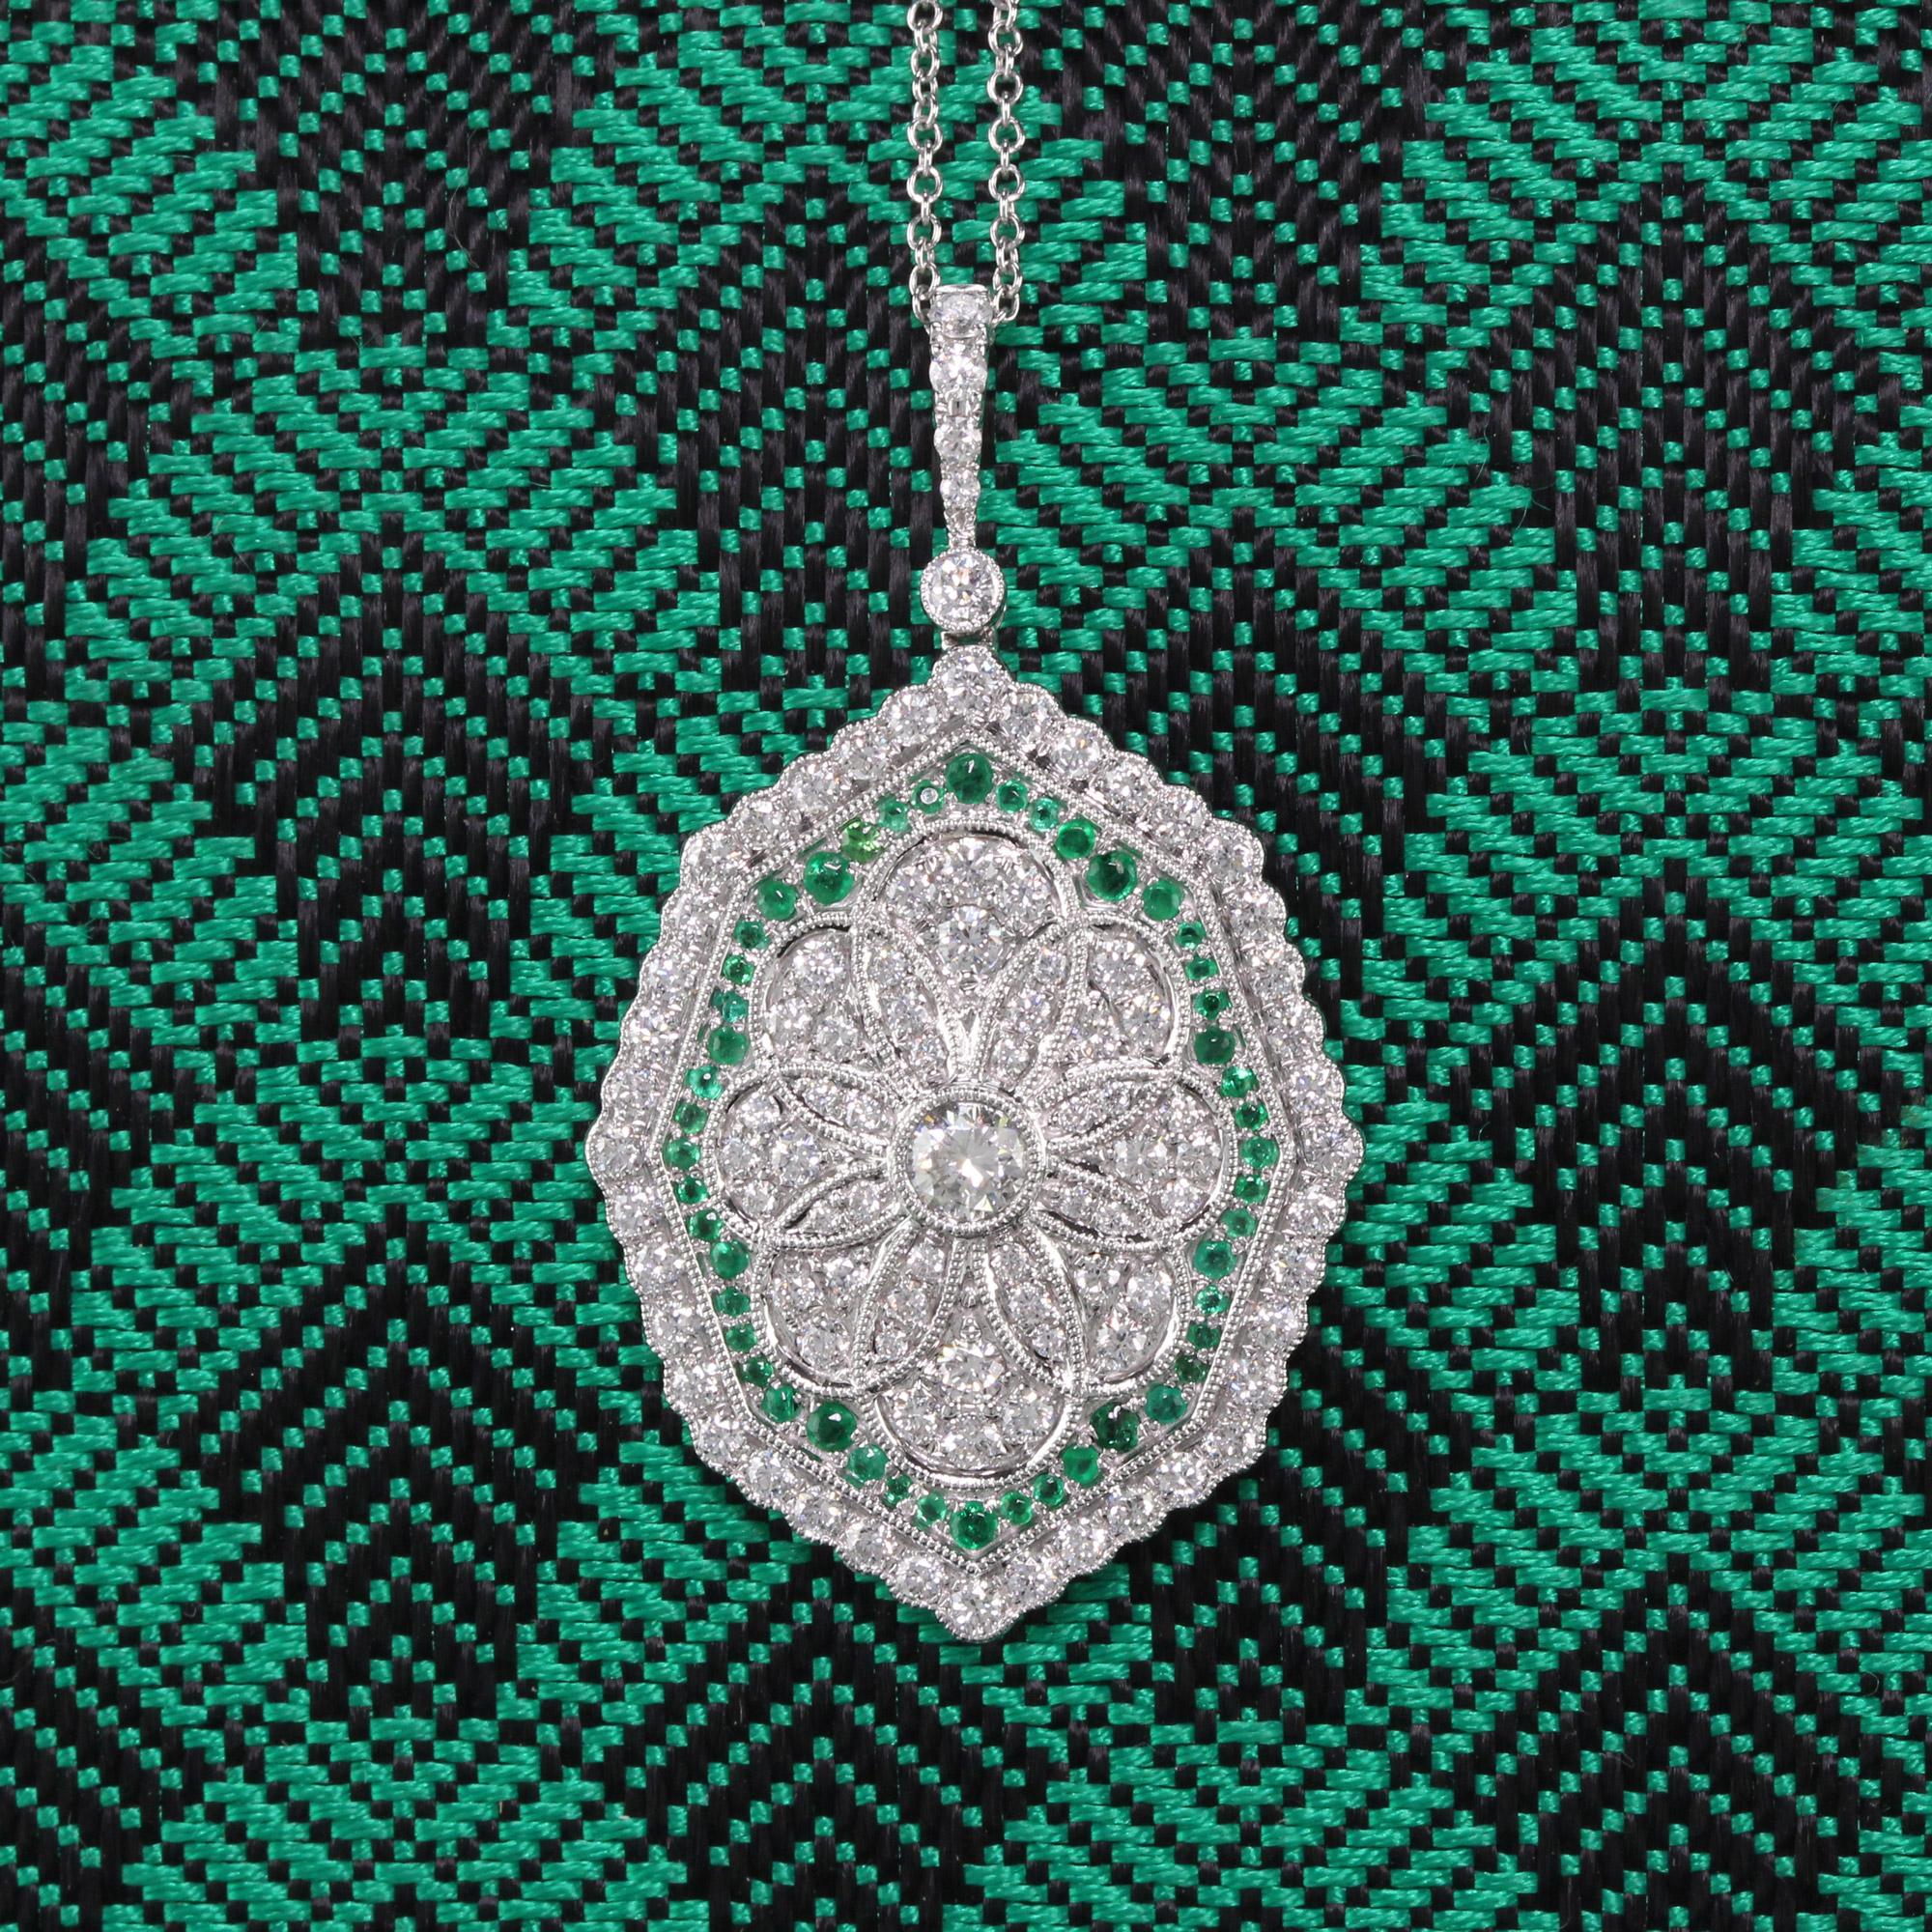 Gorgeous emerald and diamond pendant with dazzling diamond center.

Metal: 18K White Gold

Weight: 8.1 Grams

Diamond Weight: Approximately 1.20 ct.

Diamond Color: G

Diamond Clarity: VS2

Gemstone Weight: Approximately 0.50 ct.